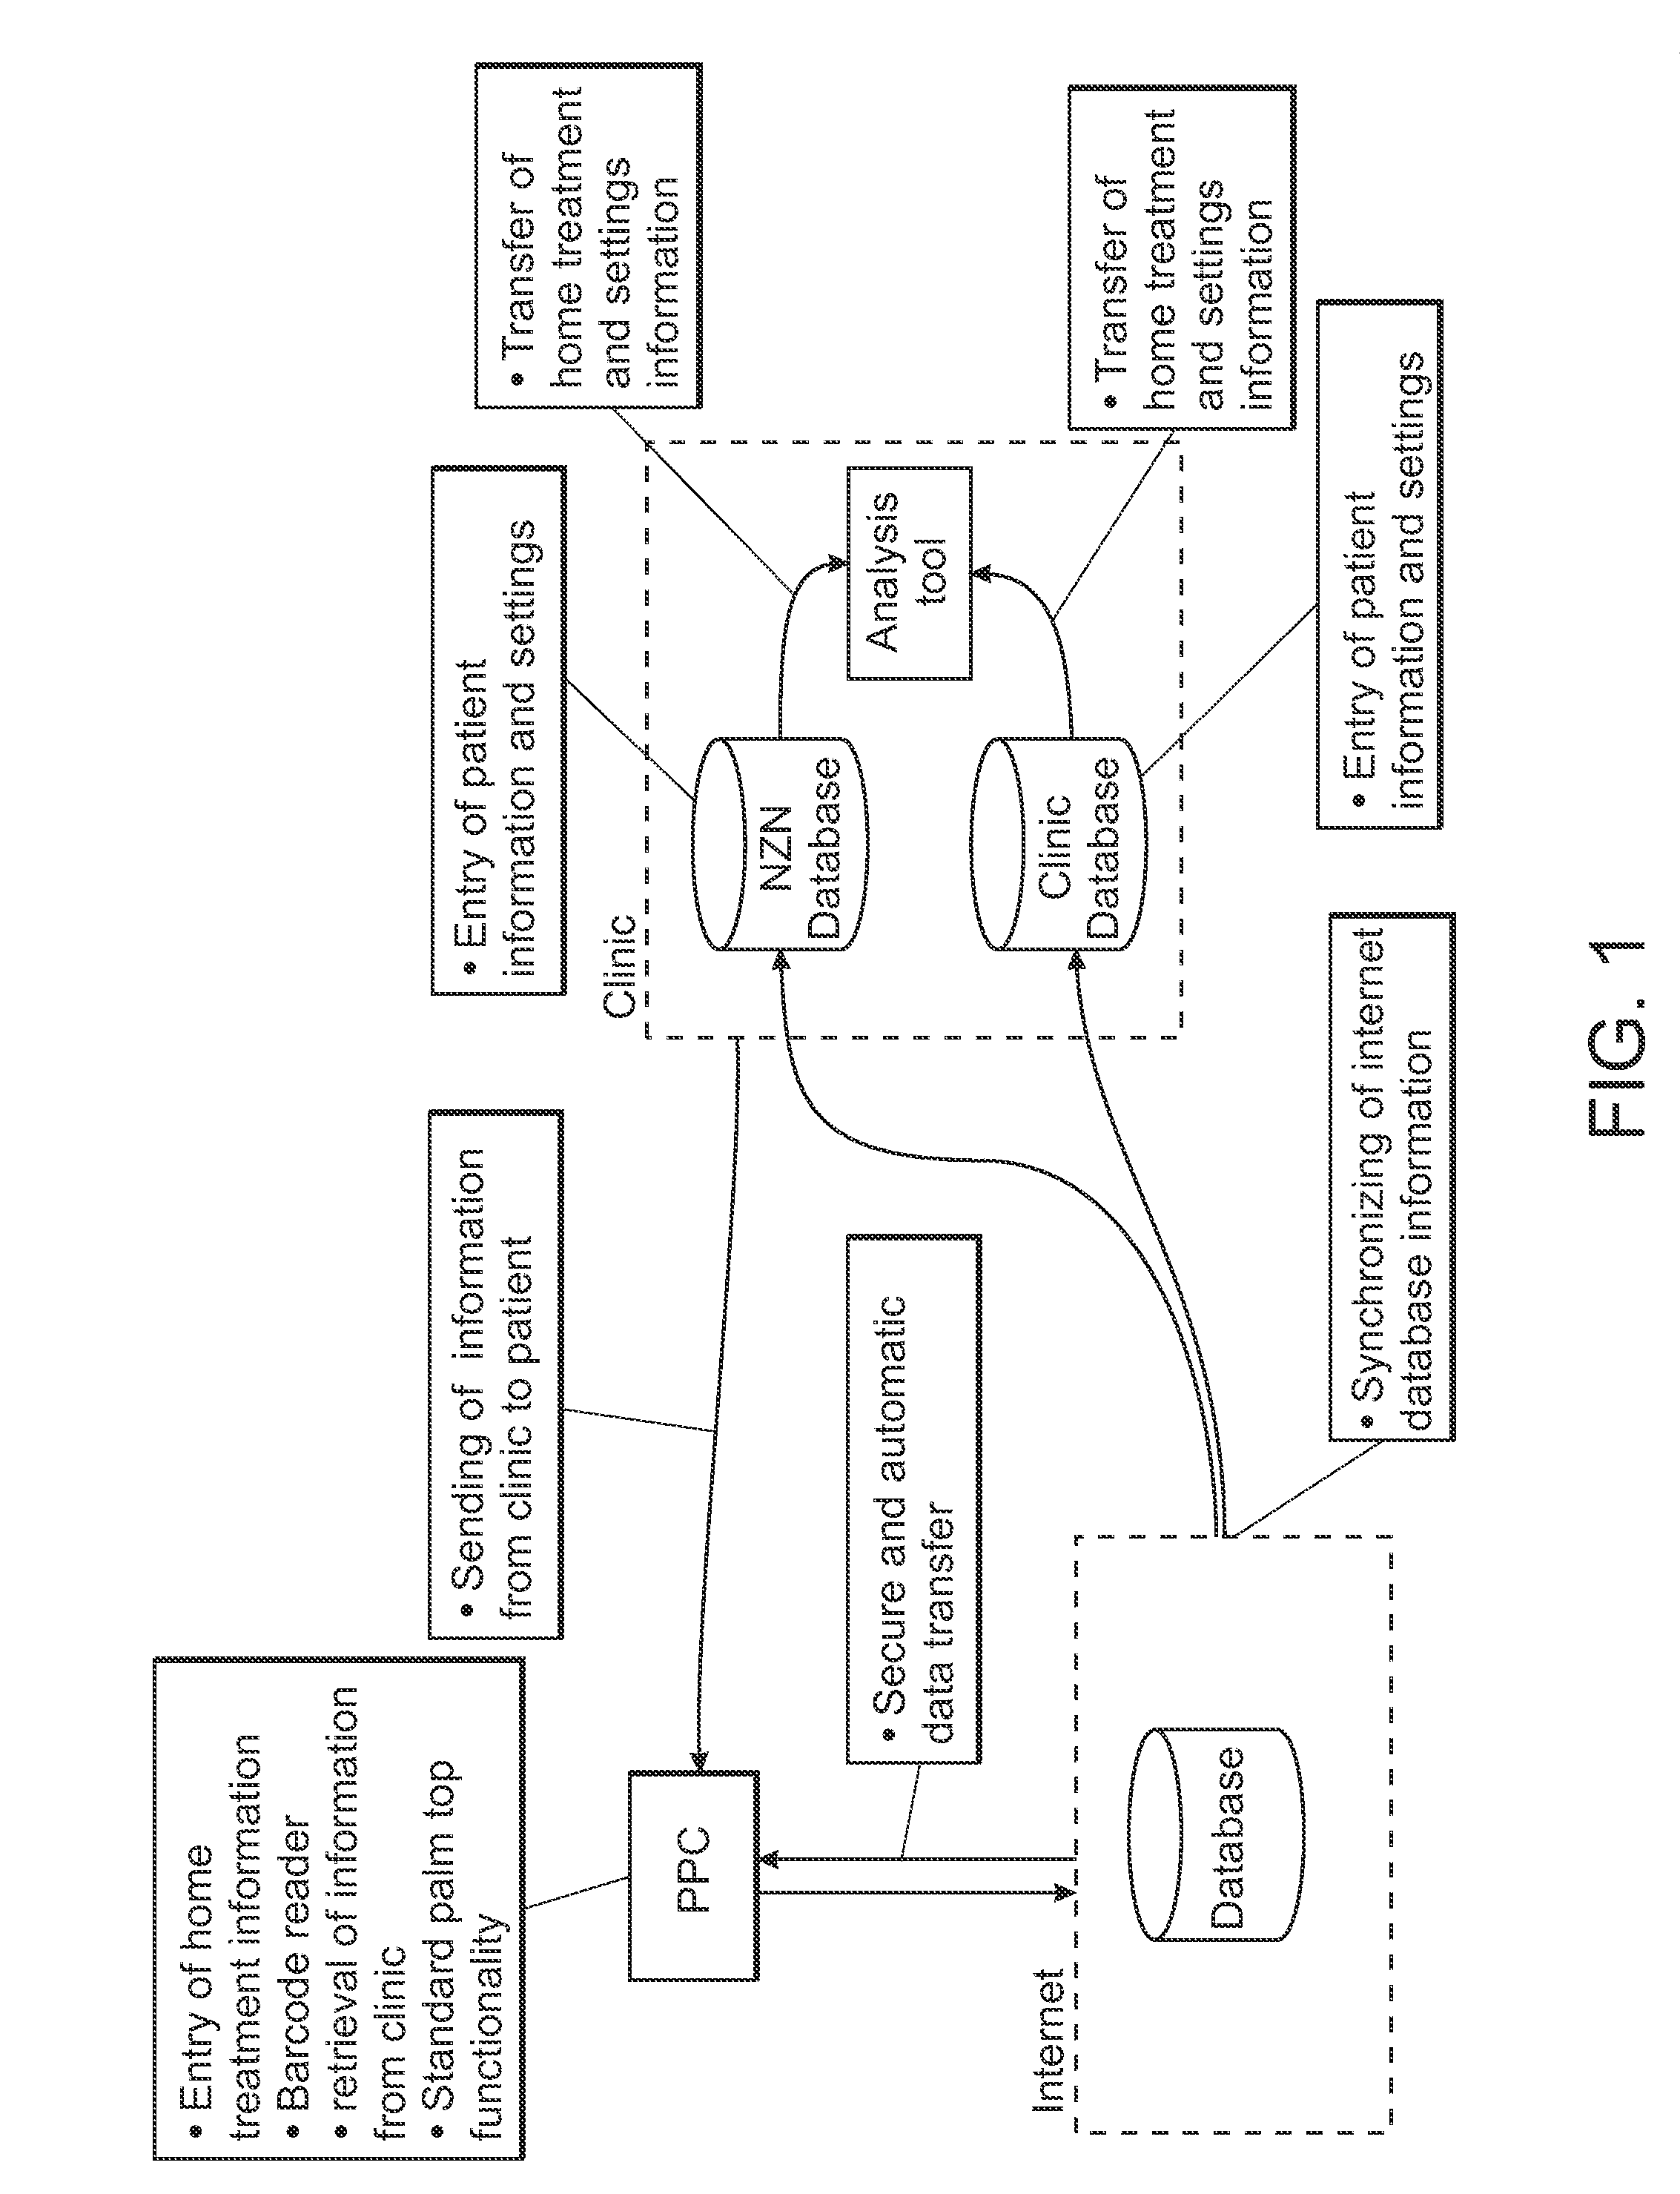 System and method for assisting in the home treatment of a medical condition